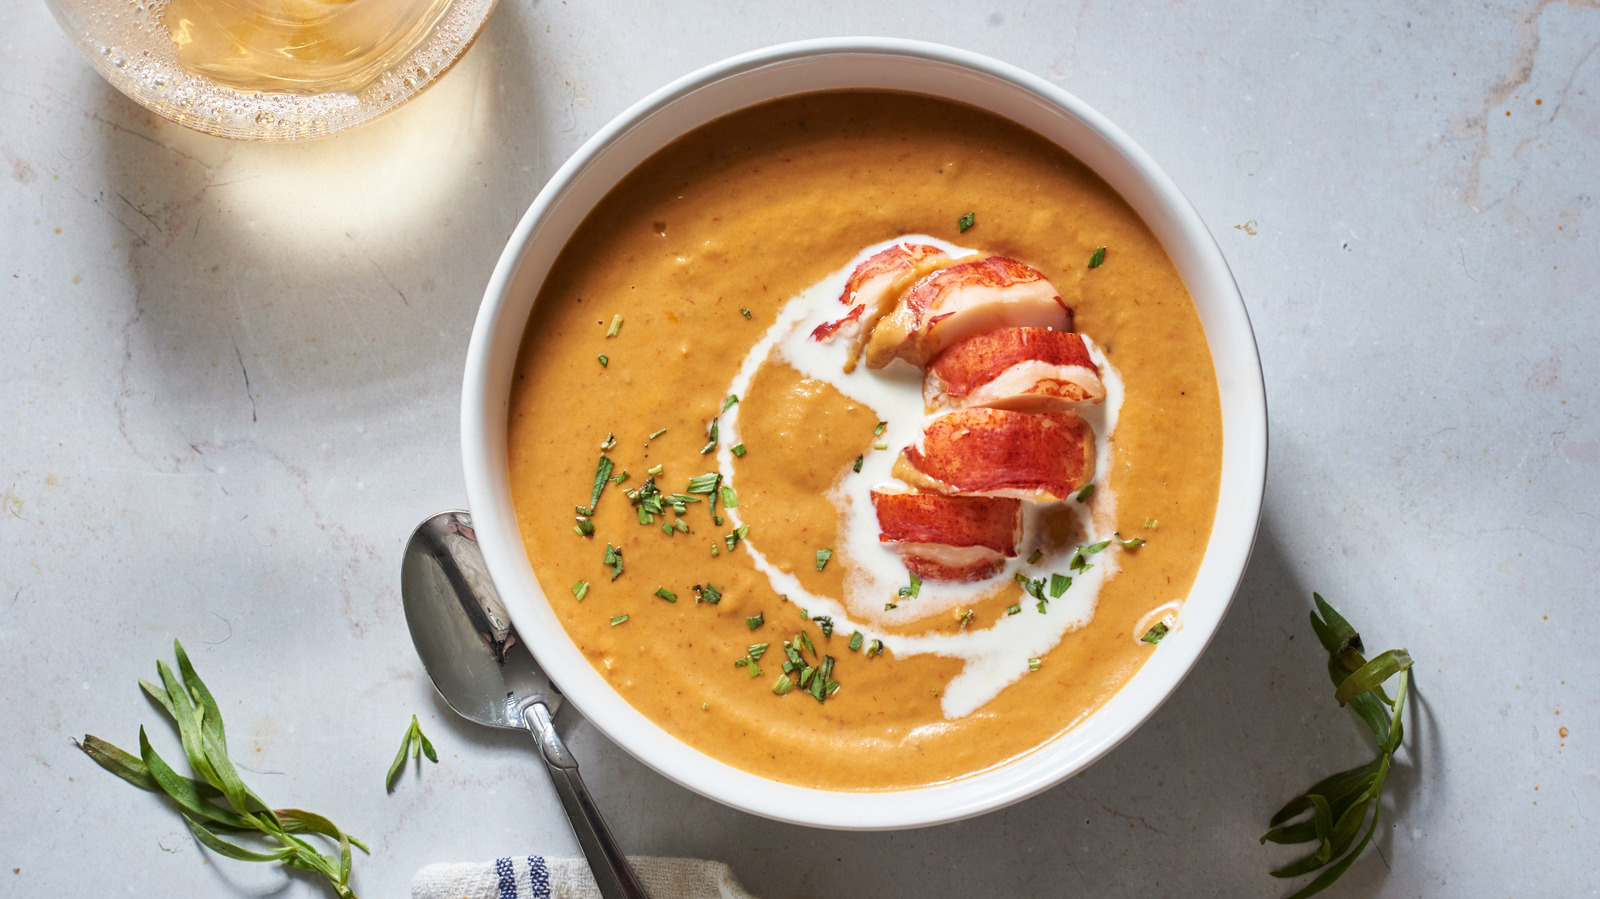 https://www.tastingtable.com/img/gallery/rich-and-creamy-lobster-bisque-recipe/l-intro-1688145019.jpg